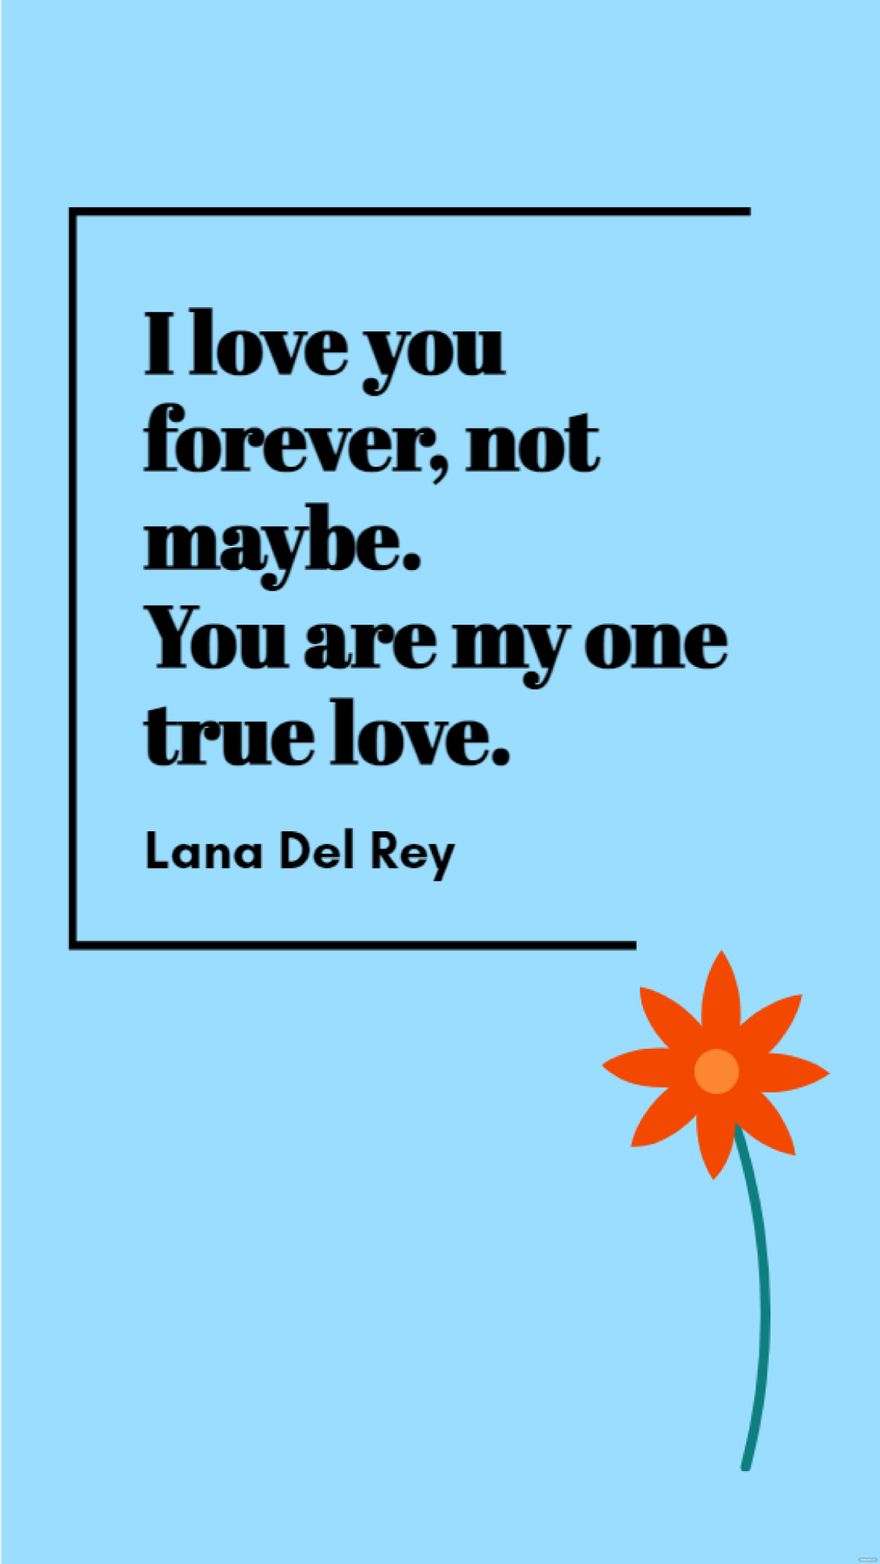 Lana Del Rey - I love you forever, not maybe. You are my one true love.